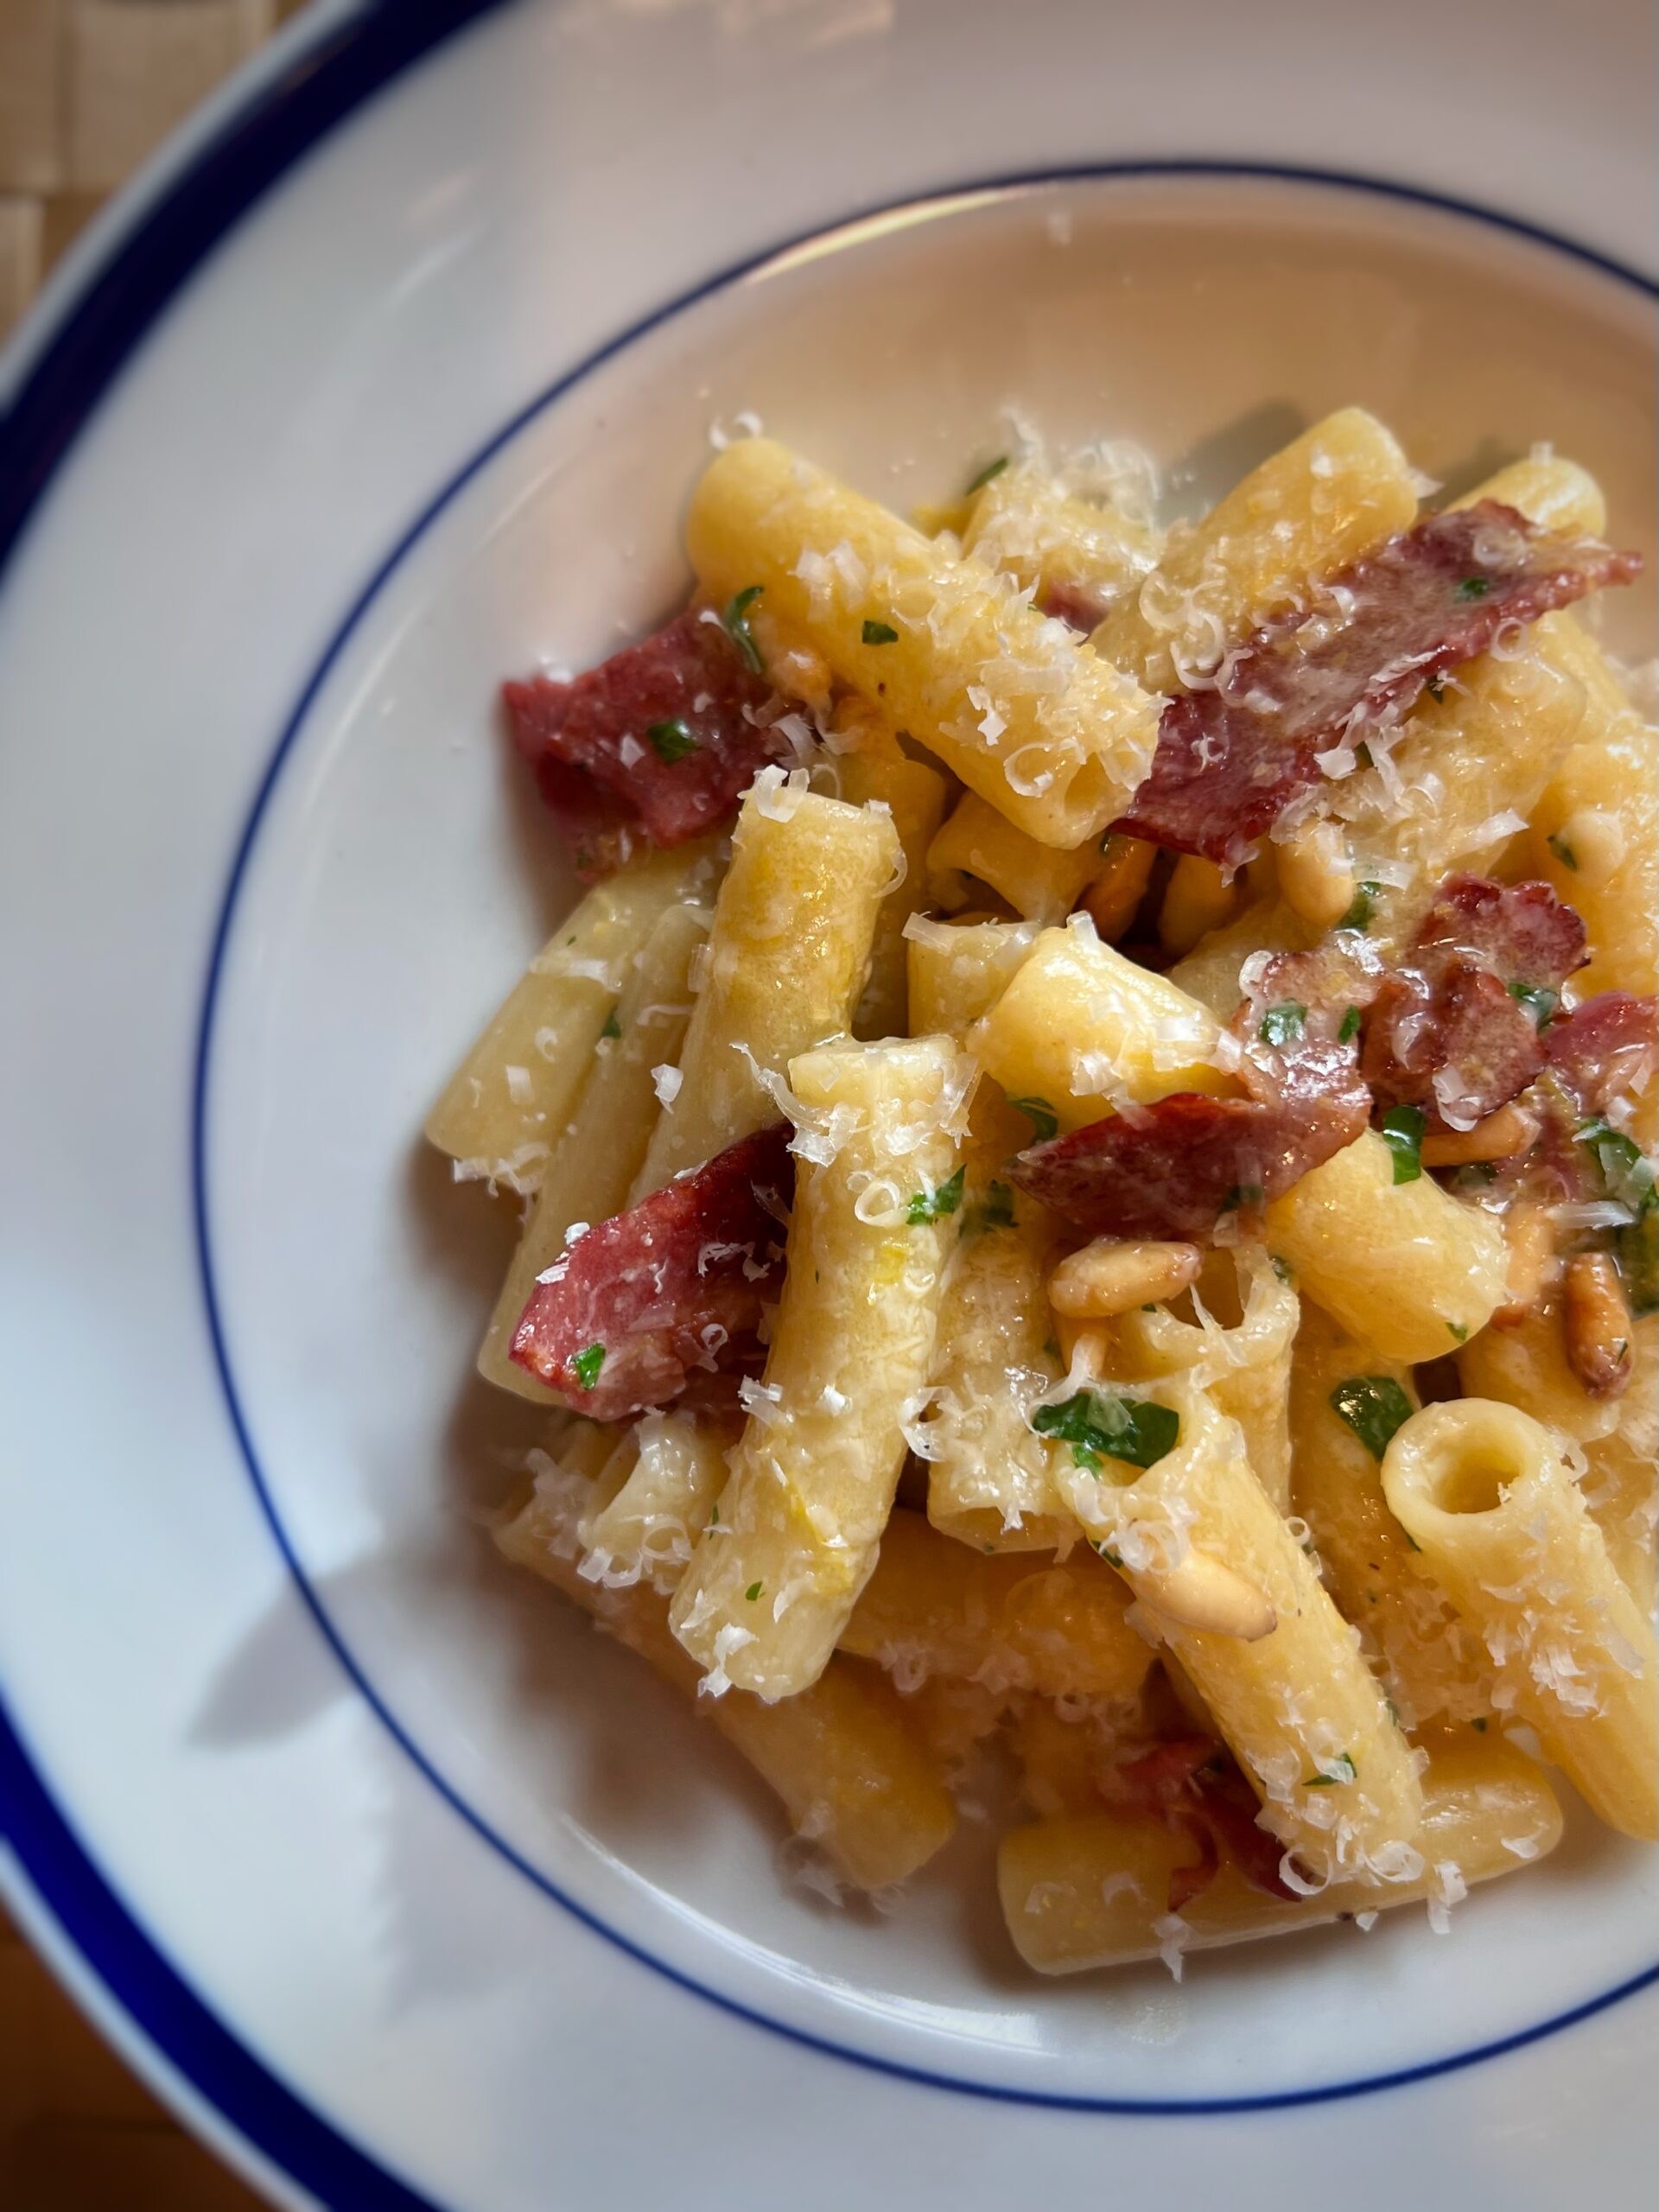 Pasta with Bacon, Cheese, Lemon, and Pine nuts